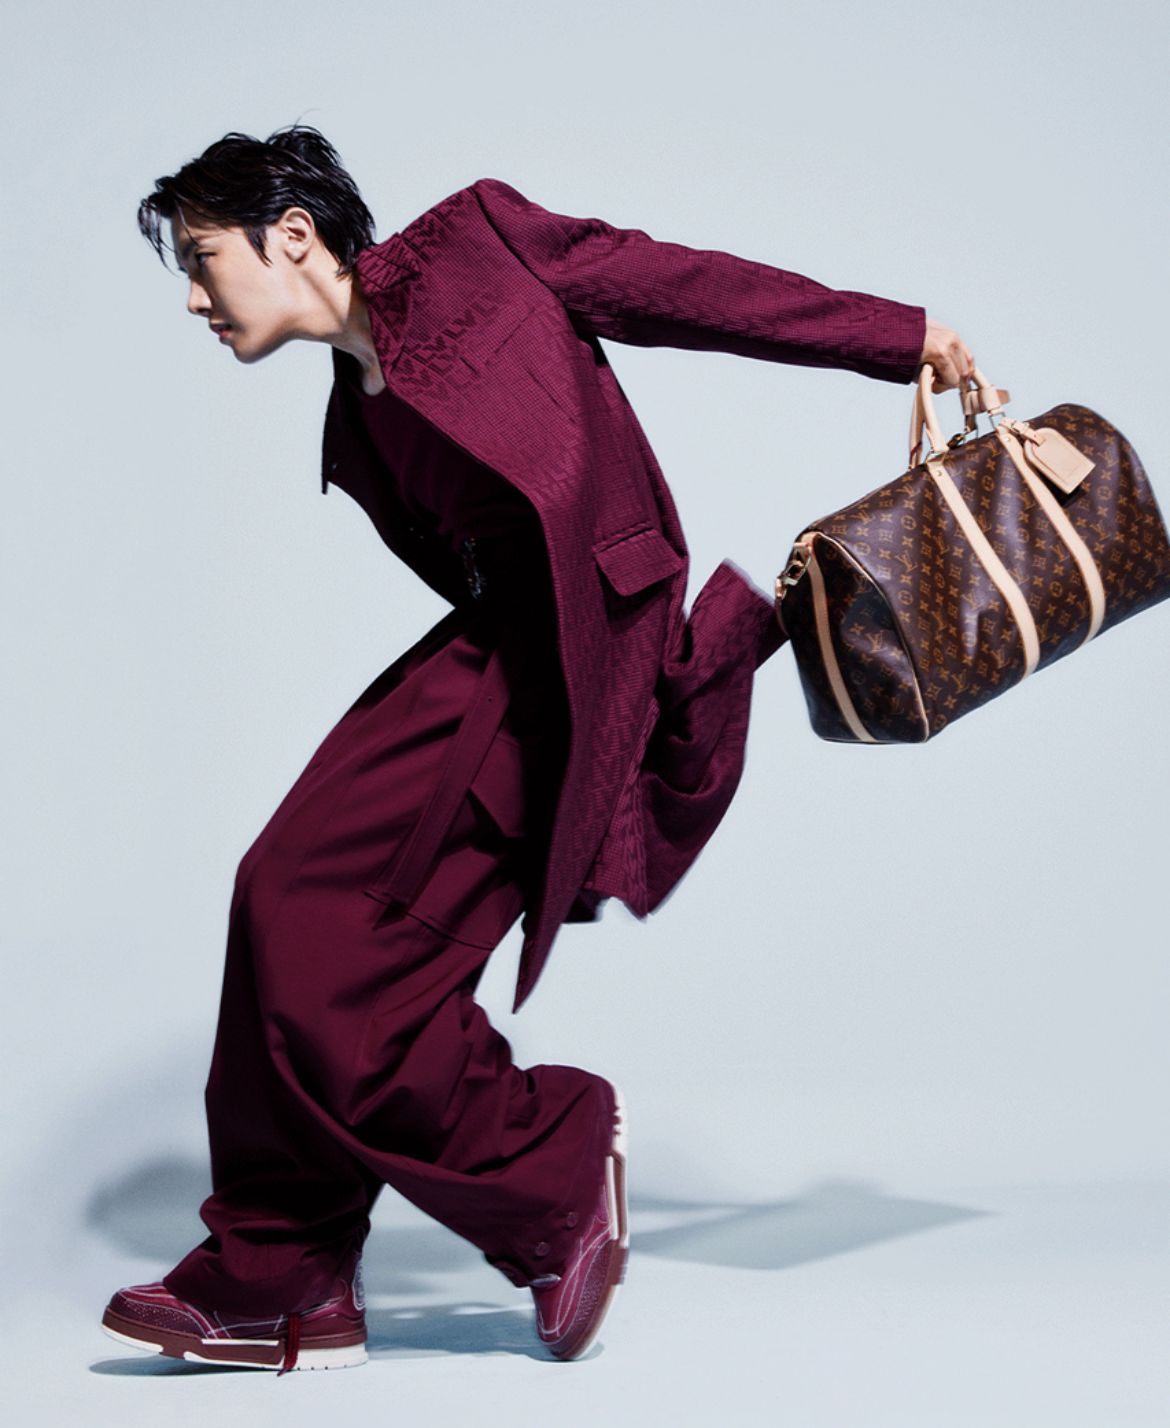 Kpop star J Hope is a stunner in his debut Louis Vuitton campaign featuring  the iconic Keepall Bag